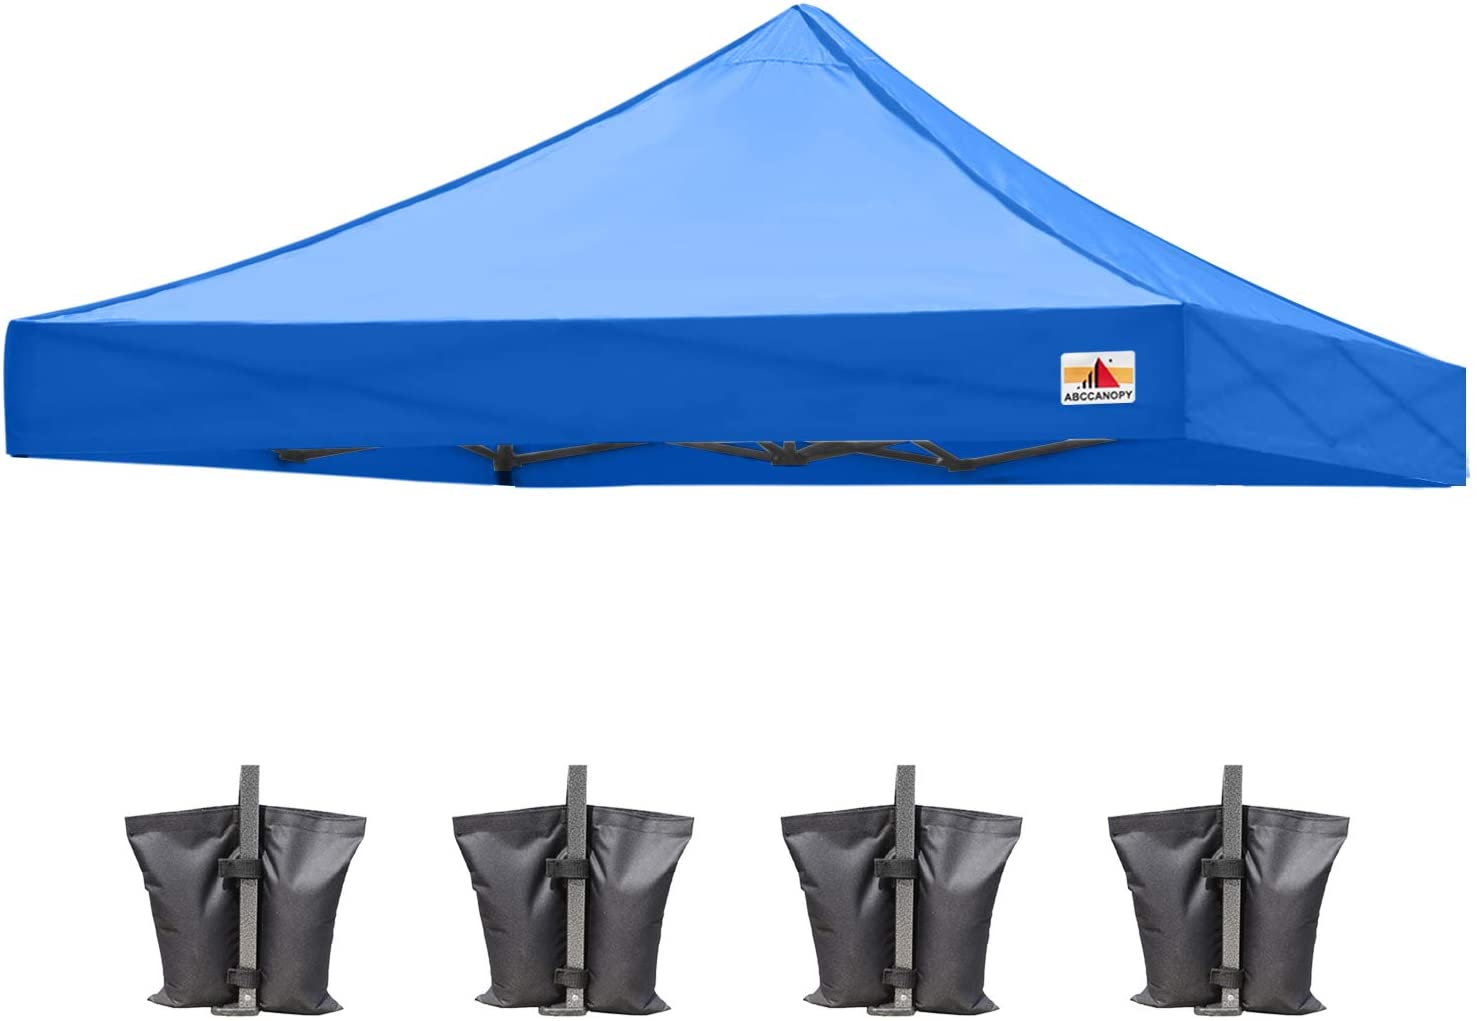 Featured here is the Blue Canopy TOP, crafted to complement the ABCCANOPY Commercial Deluxe 10x10 Canopy. This top not only offers protection from the elements but also enhances the aesthetic appeal of your outdoor event.